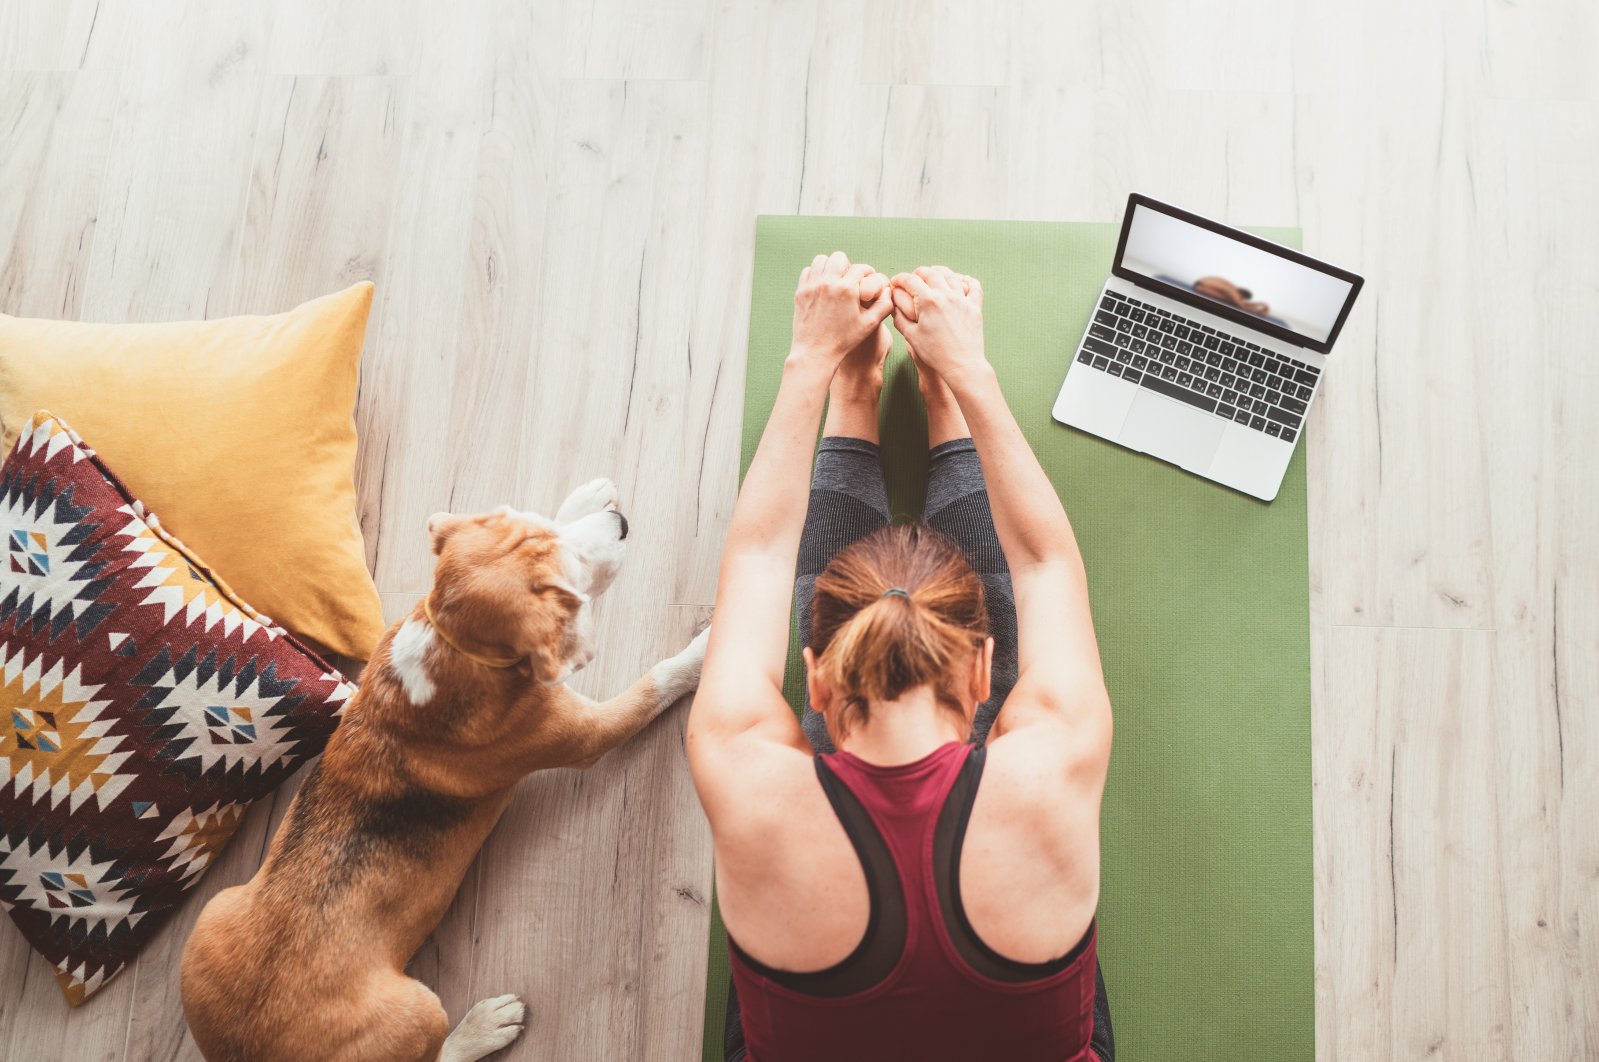 A free online yoga festival with sessions to fit around your daily schedule may be the motivation you need to start moving. (Shutterstock Photo)